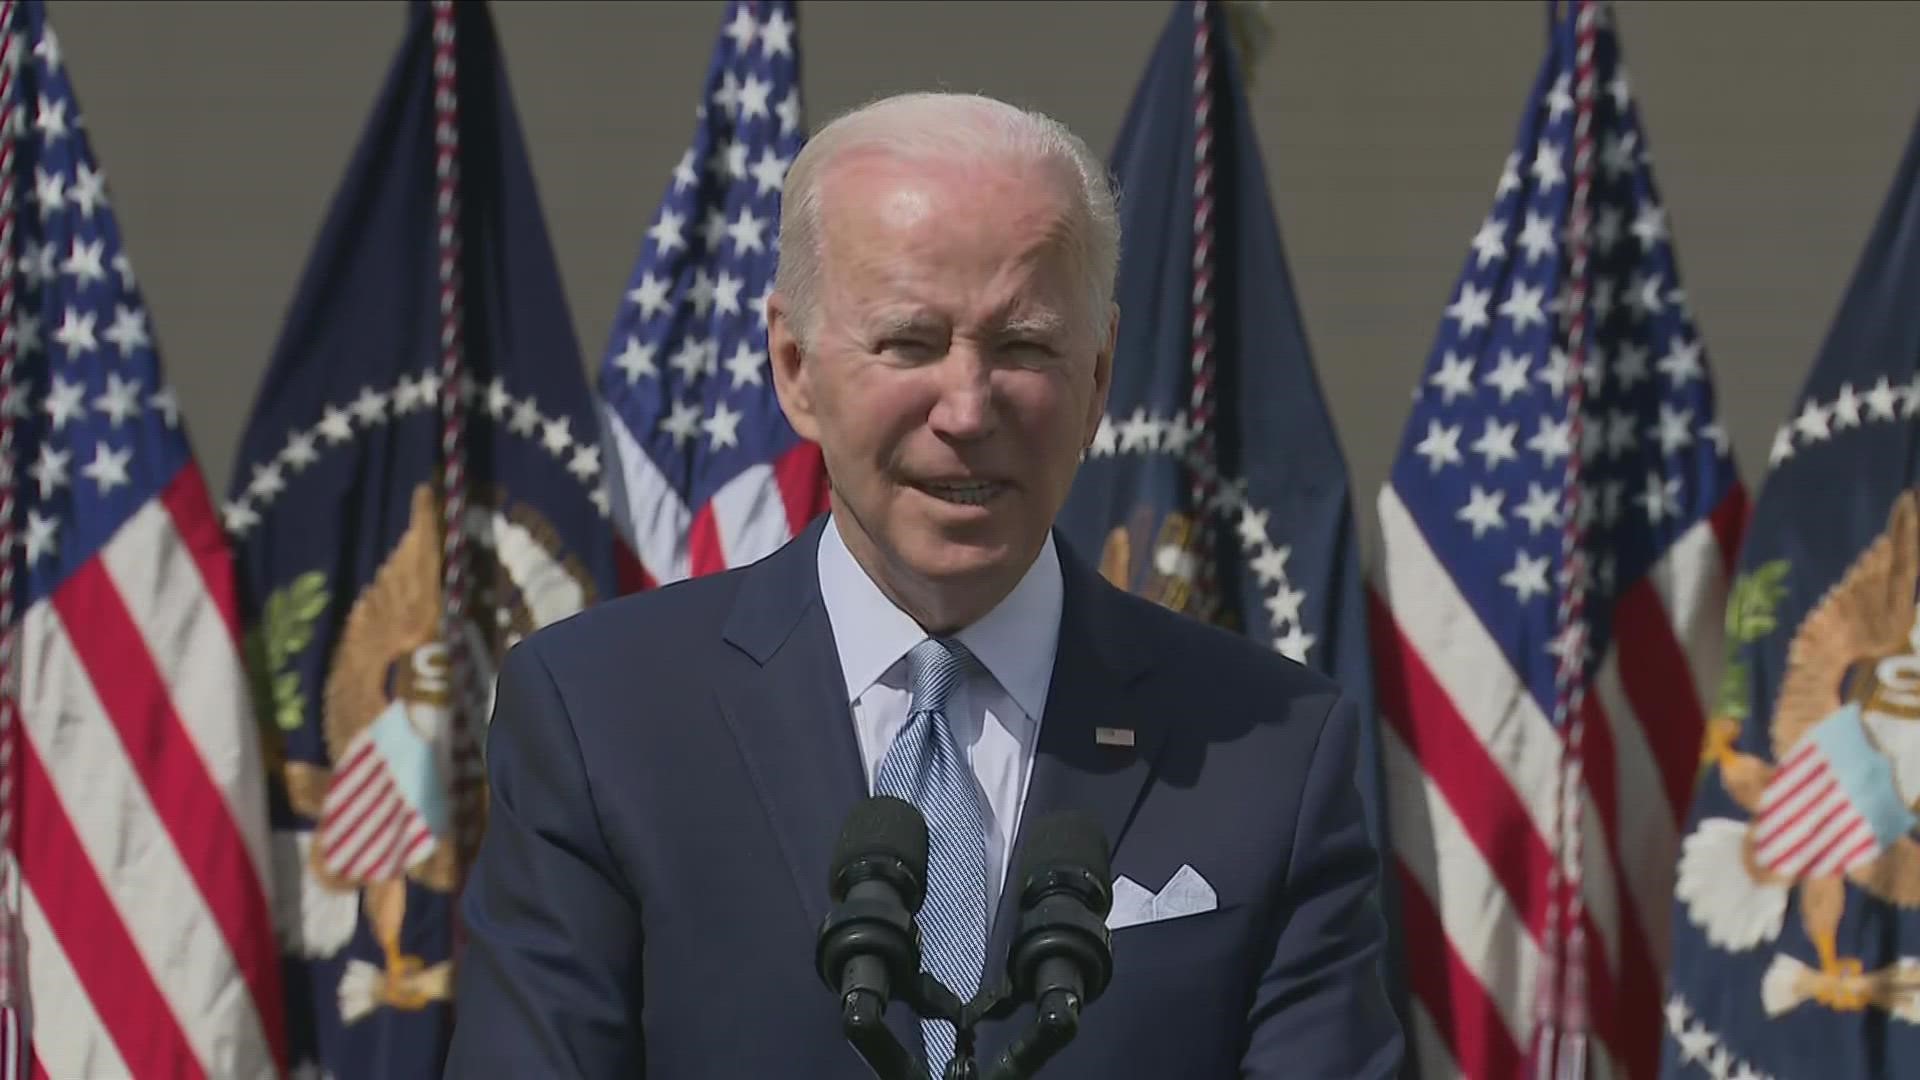 Biden had to withdraw the nomination of his first ATF nominee after it stalled because of opposition from Republicans and some Democrats in the Senate.